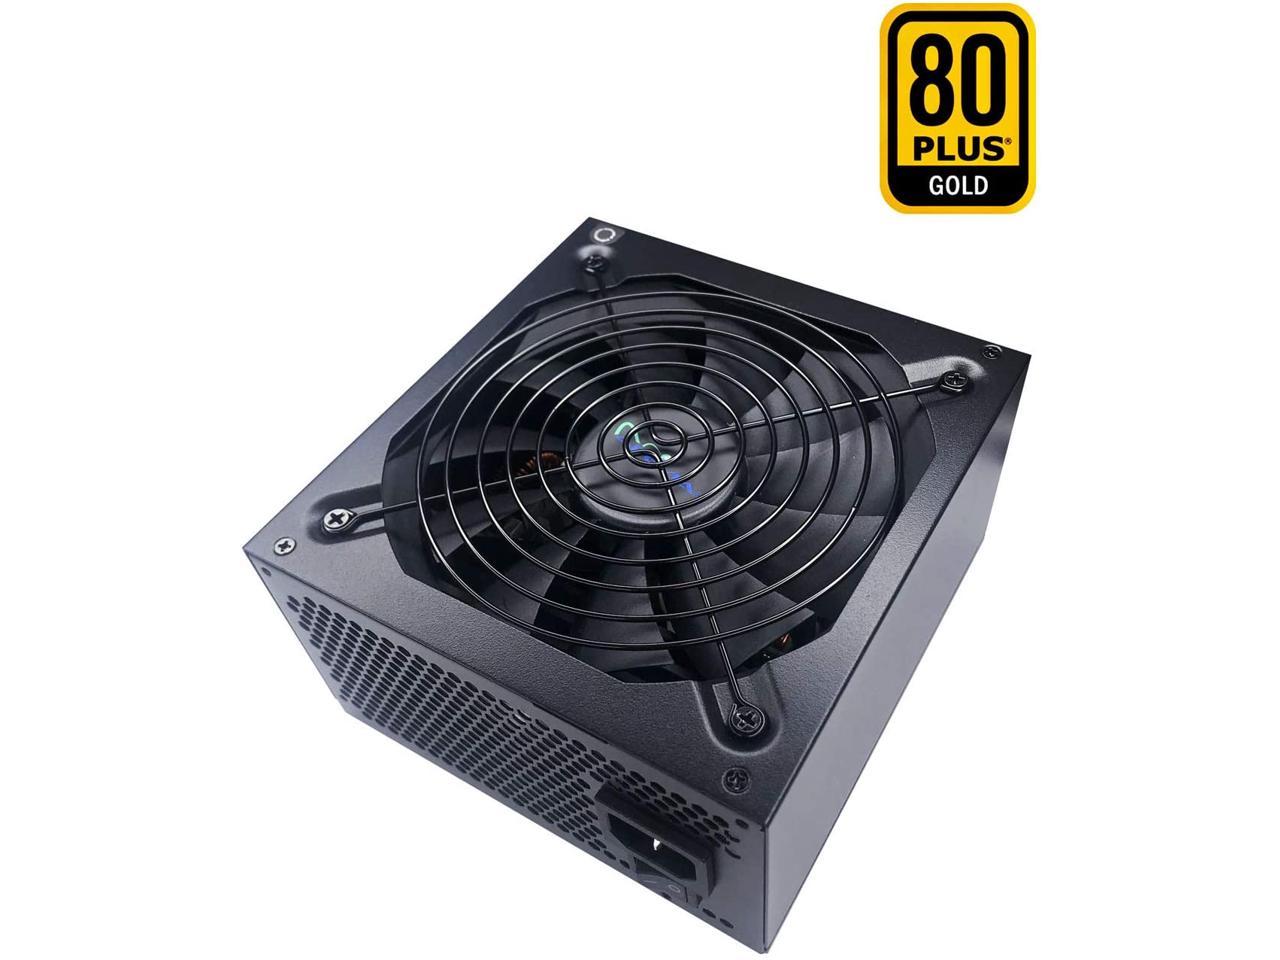 RoHS Compliance, Active PFC ATX Gaming Power Supply